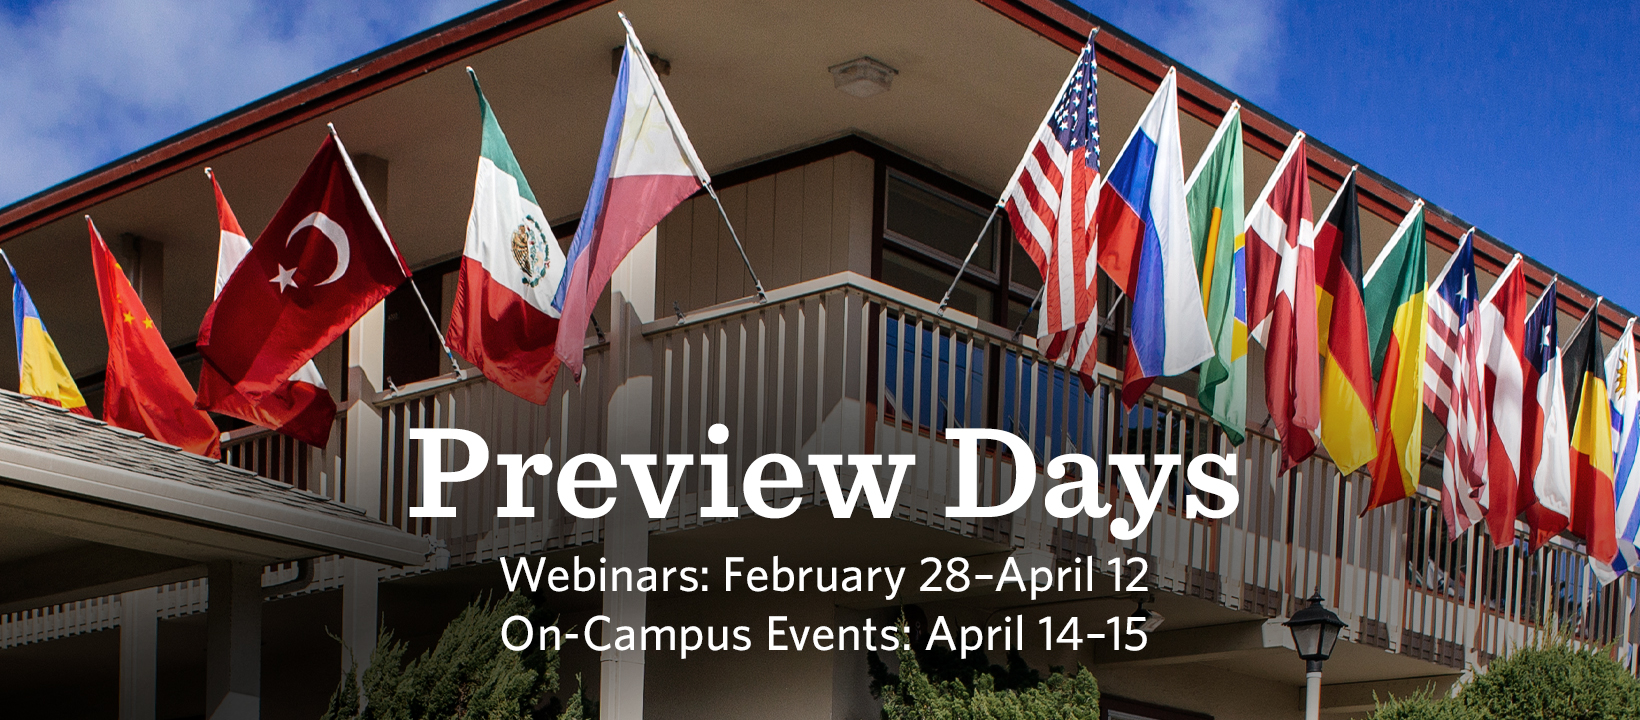 Preview Days poster showing flags on a building and the dates of the events "Webinars: Feb 28 - Apr 12. On-Campus Events: Apr 14 - 15"https://www.middlebury.edu/institute/admissions/visit/preview-days